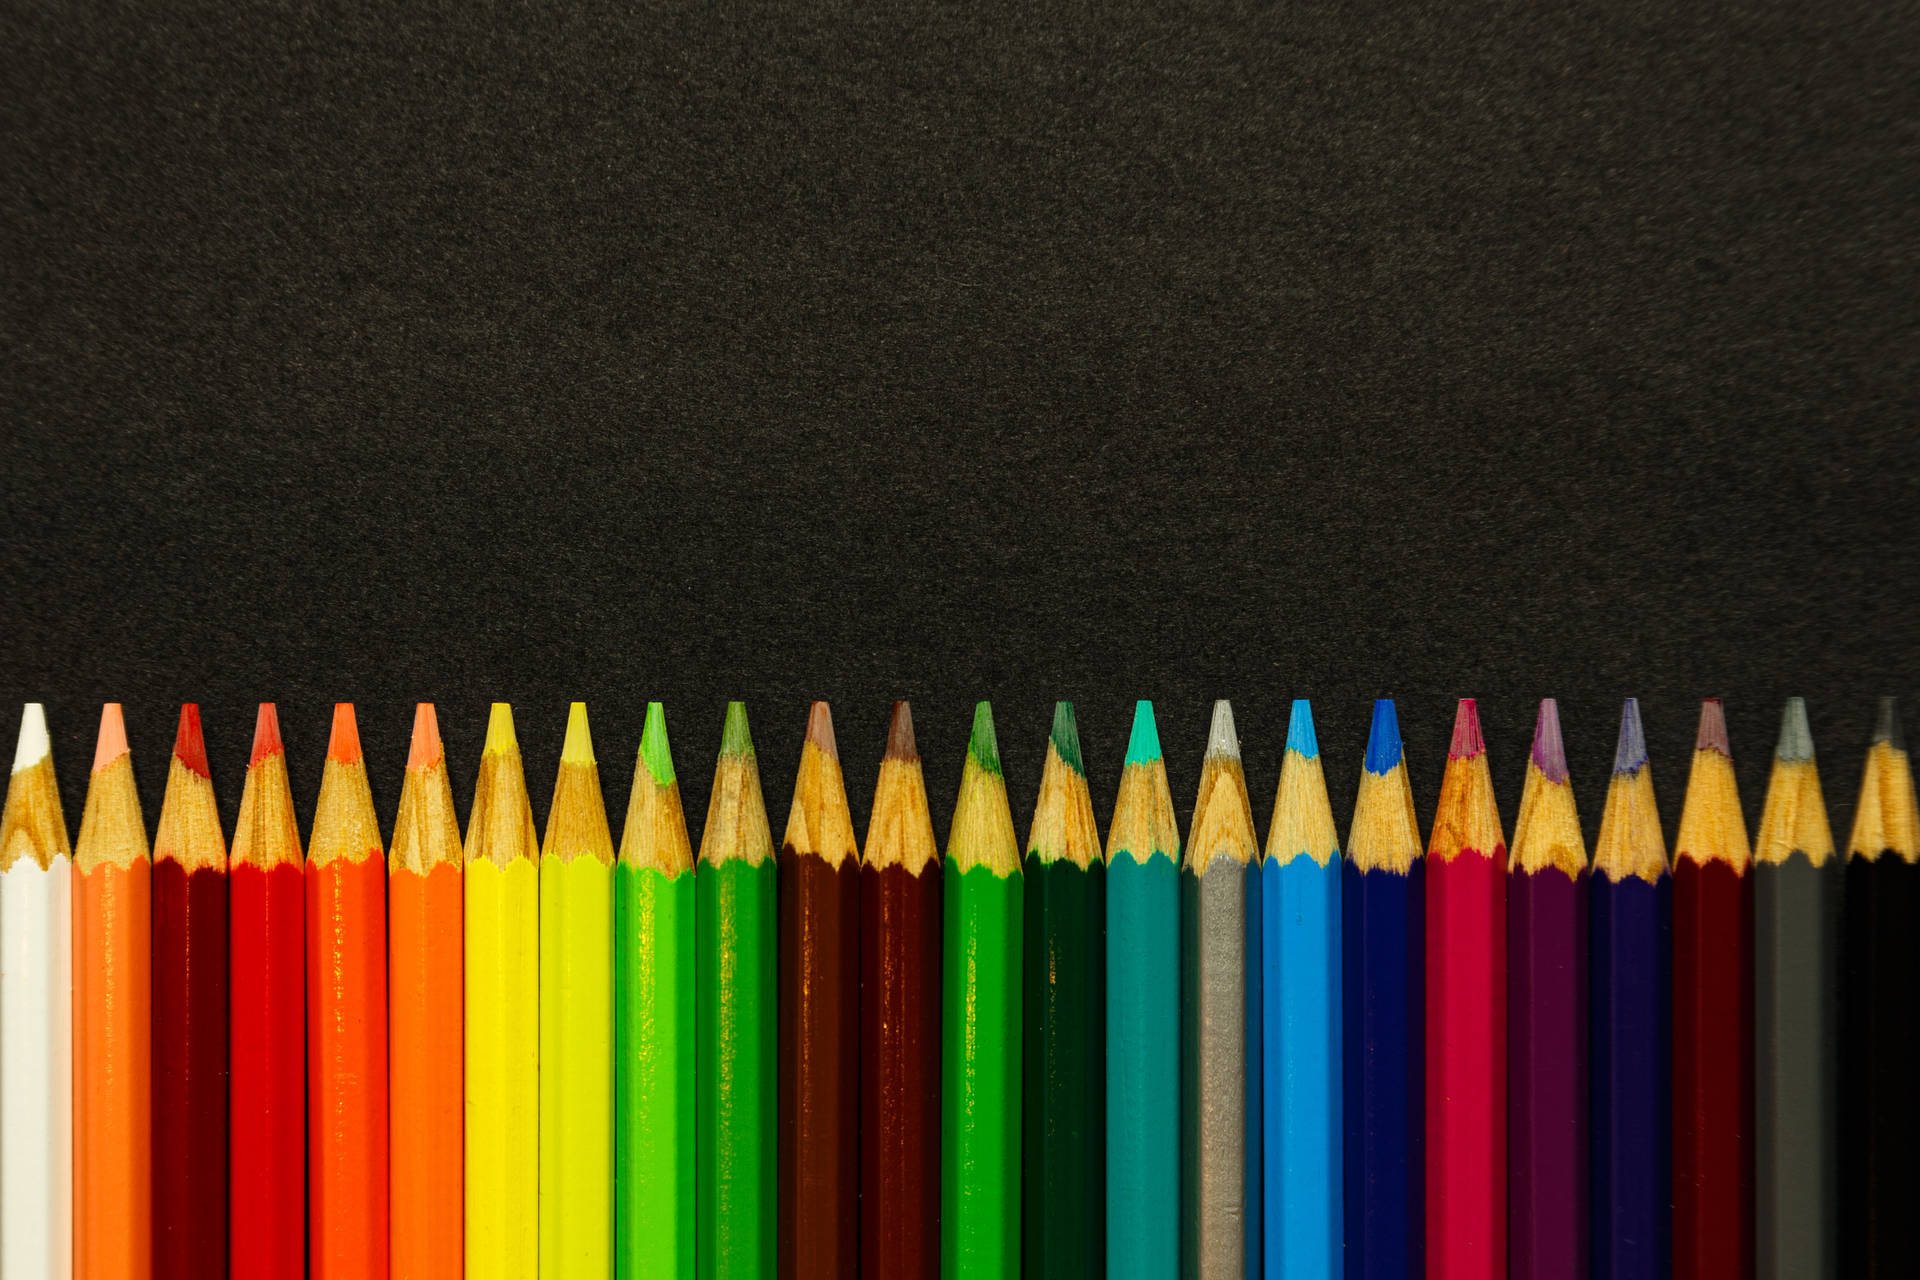 Colored Sharp Pencils Against Black Surface Background